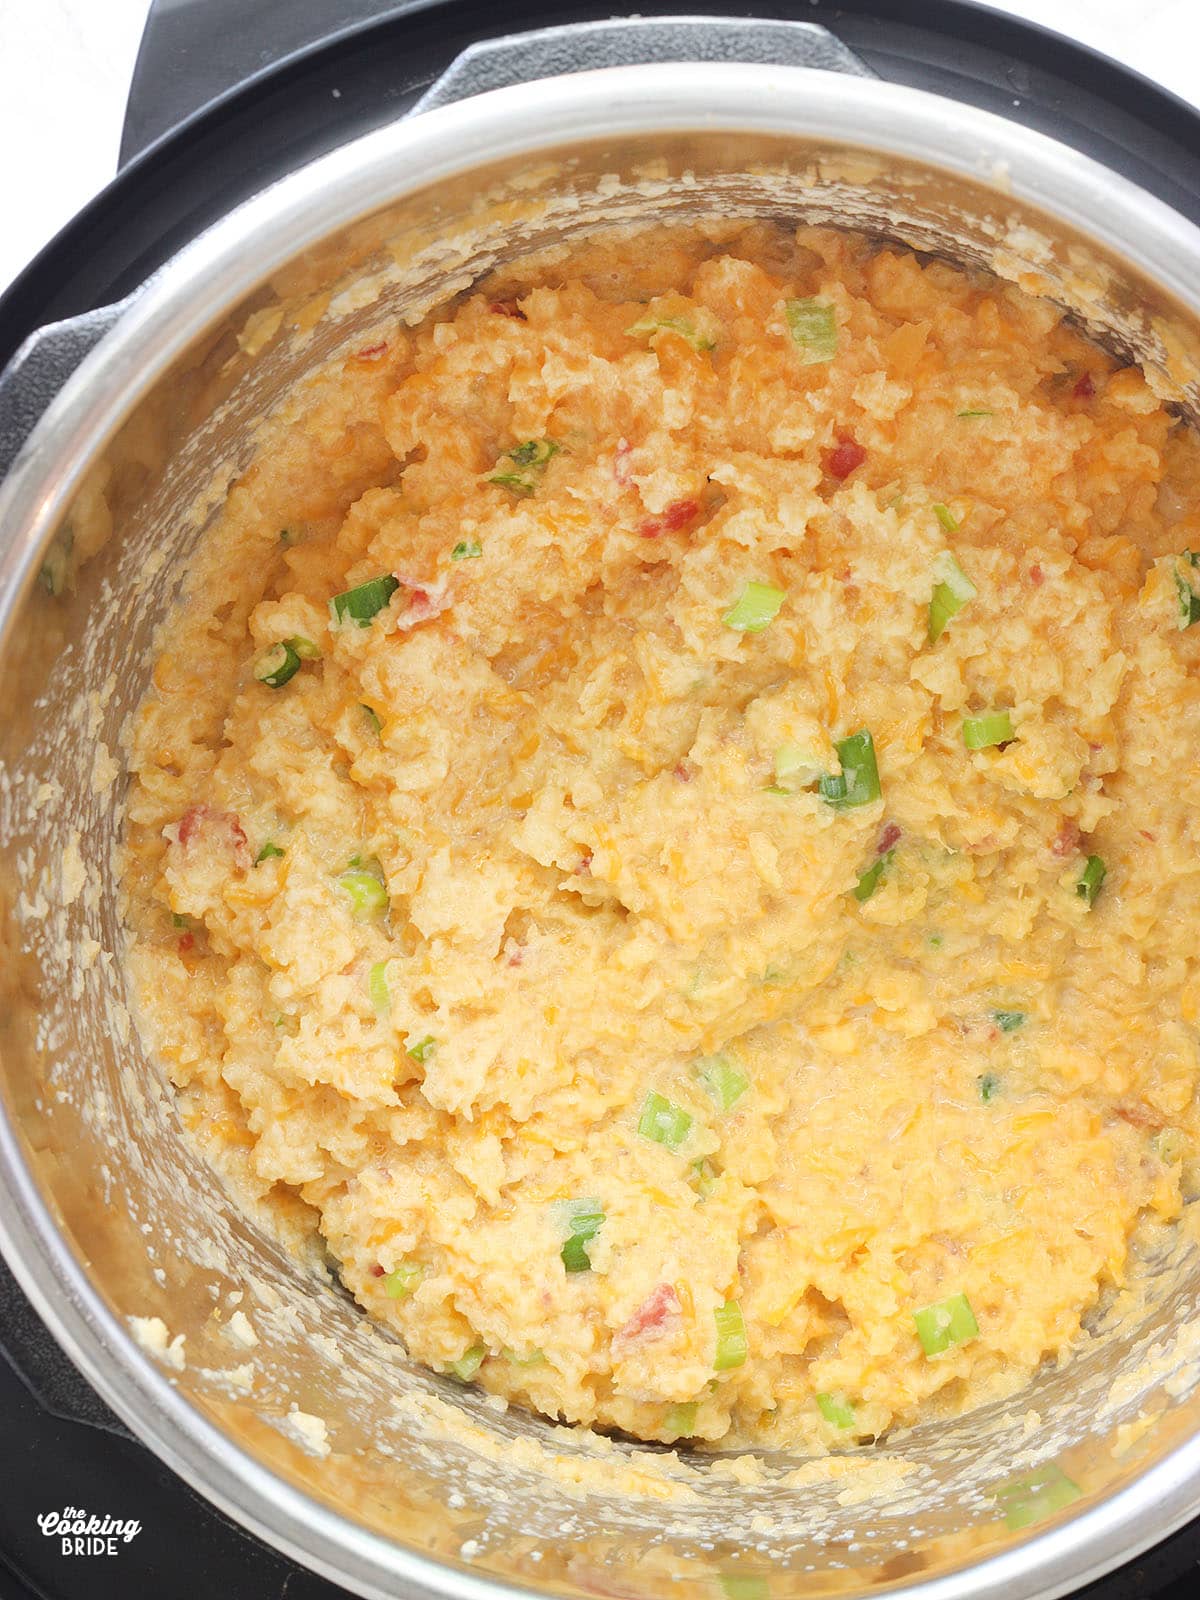 mashed rutabaga with cheese, green onions and bacon in an Instant Pot